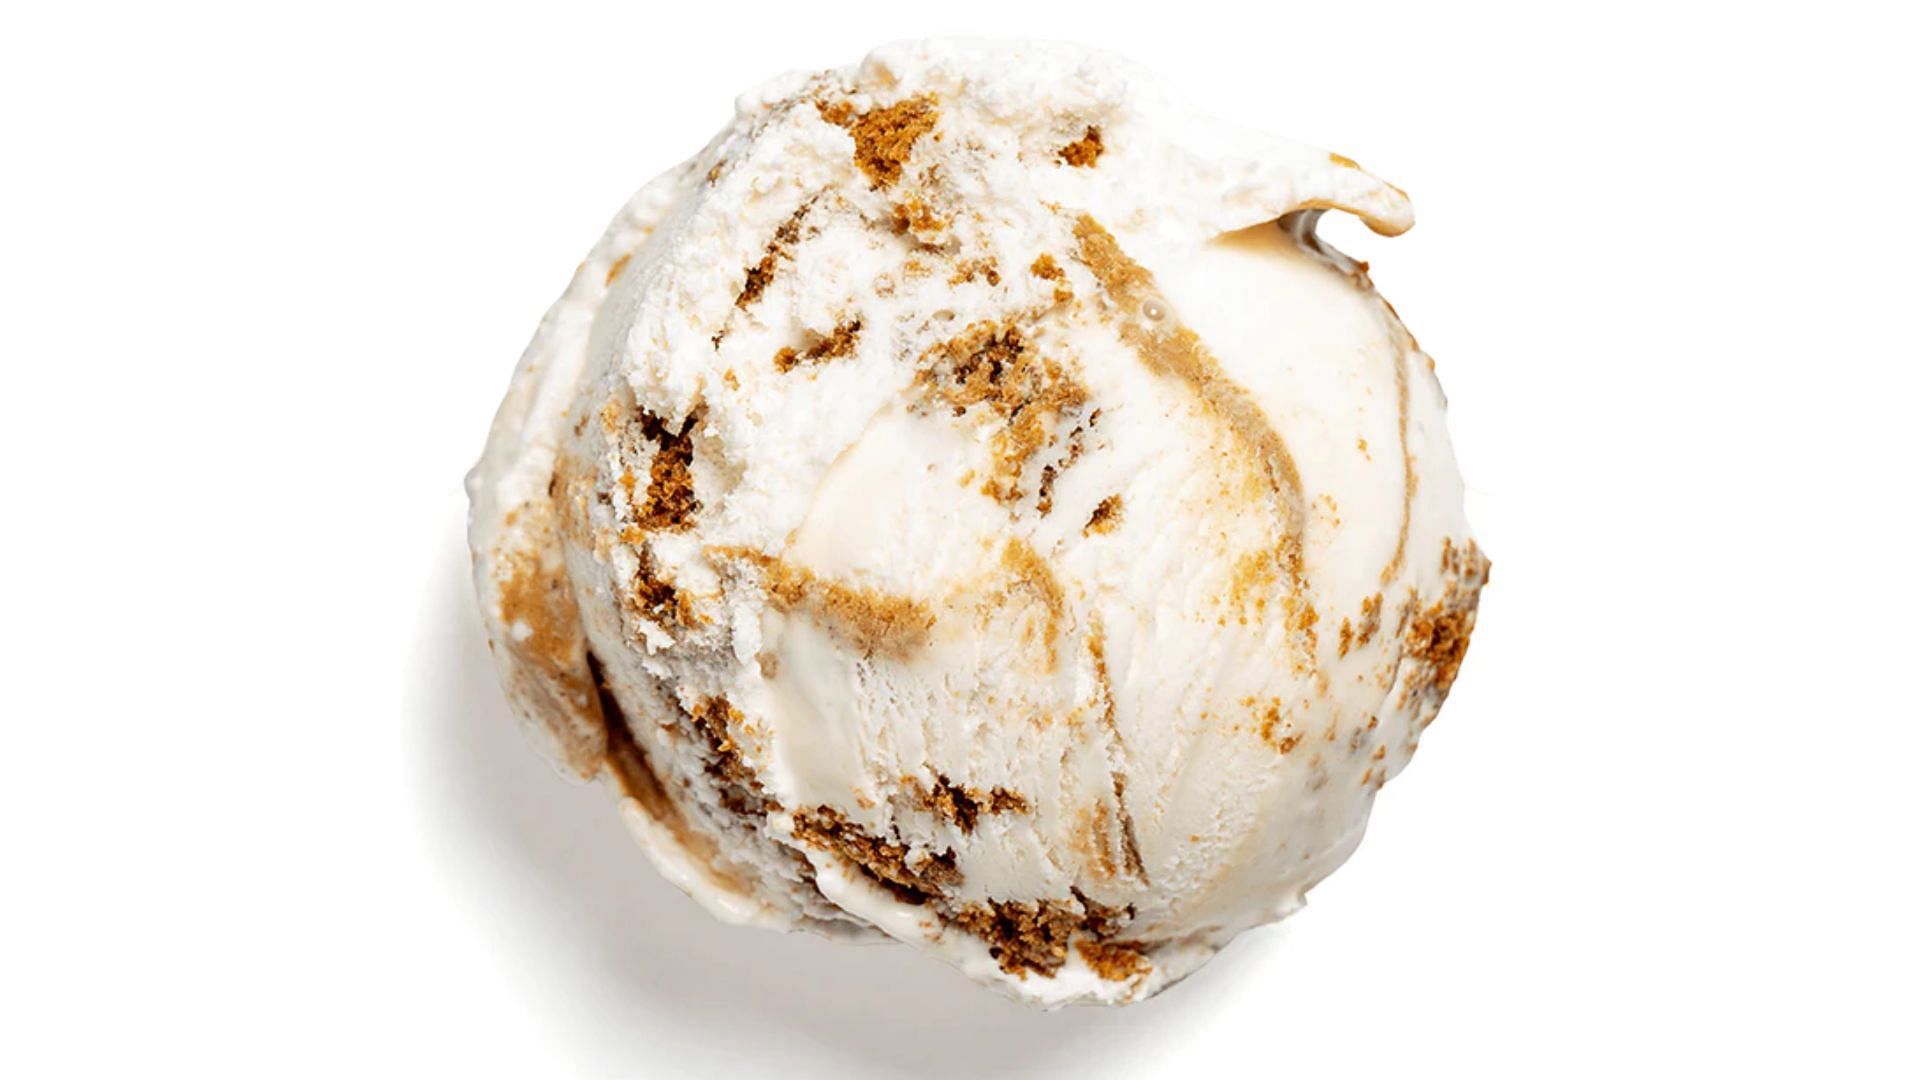 promotional image for the Gingerbread Cookie Dough ice cream (Image via Salt n Straw)